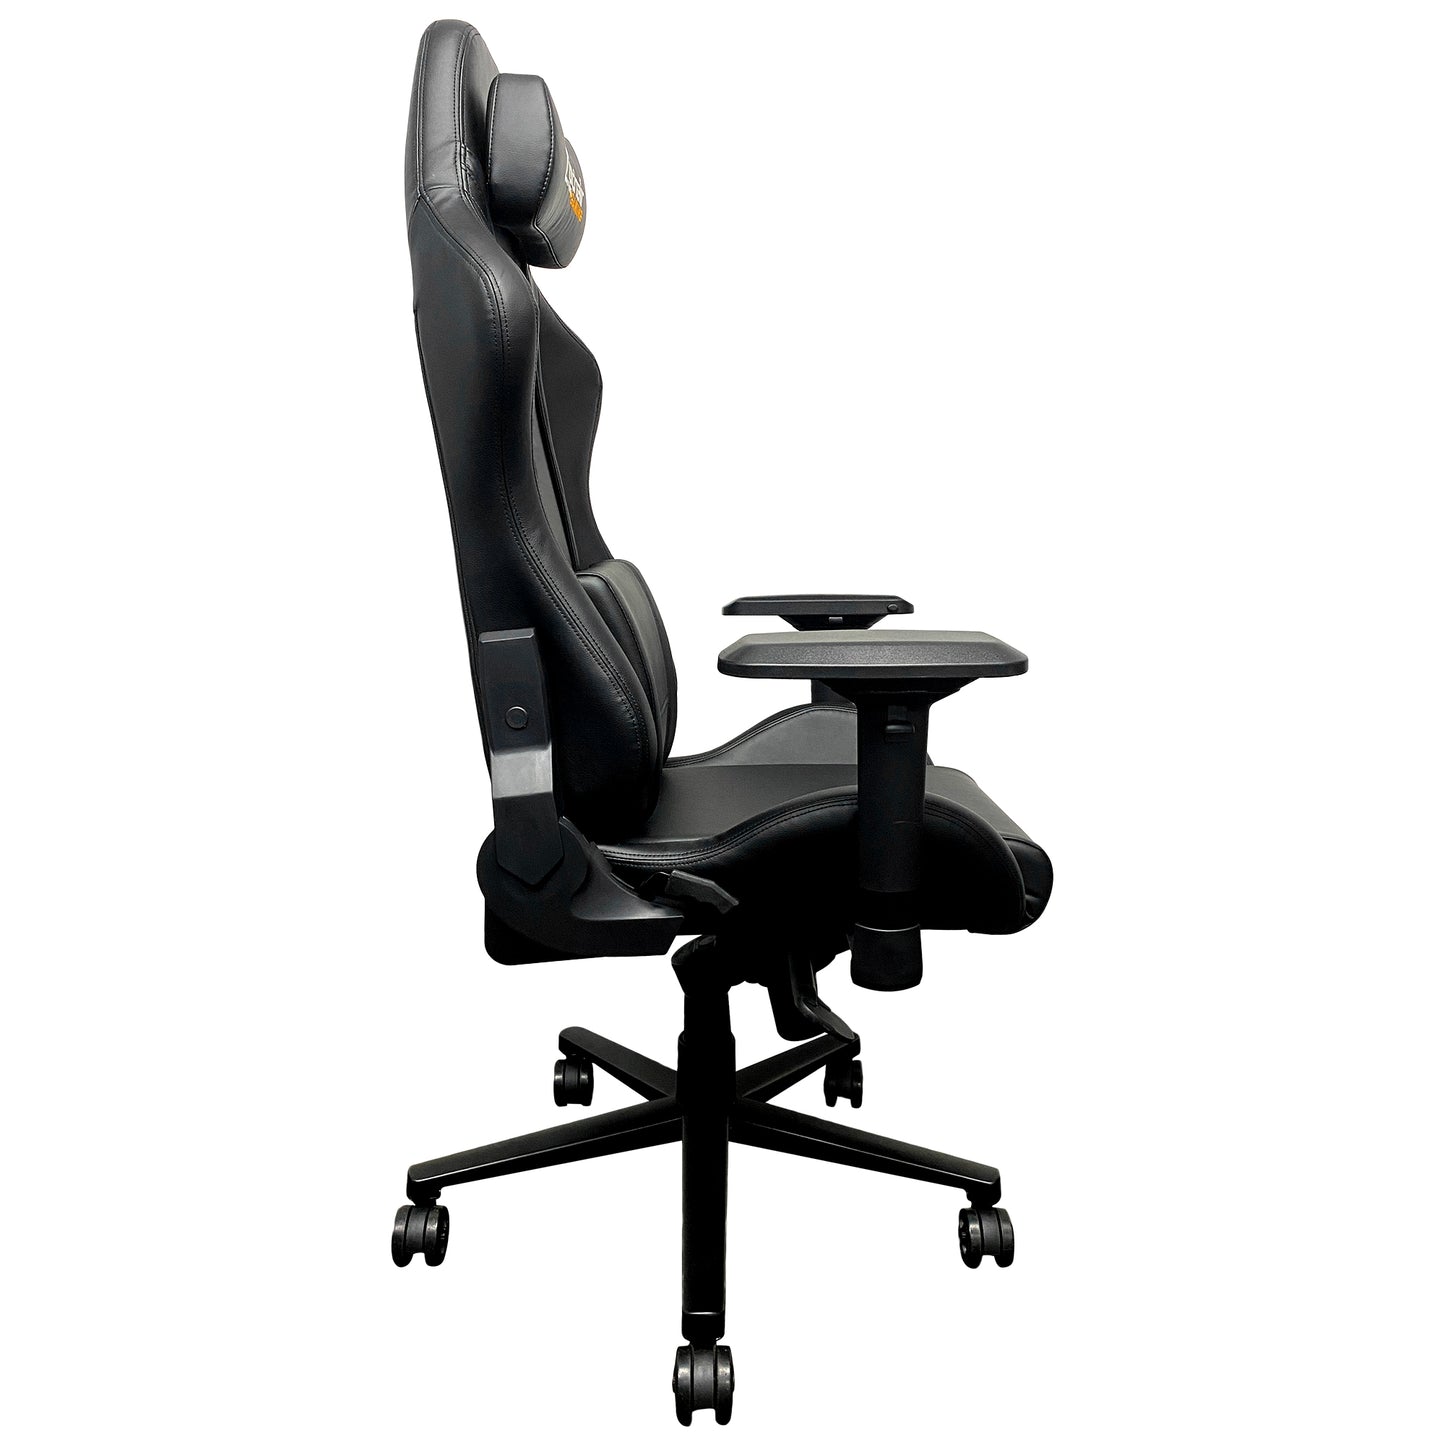 Xpression Pro Gaming Chair with Brooklyn Nets Secondary Logo